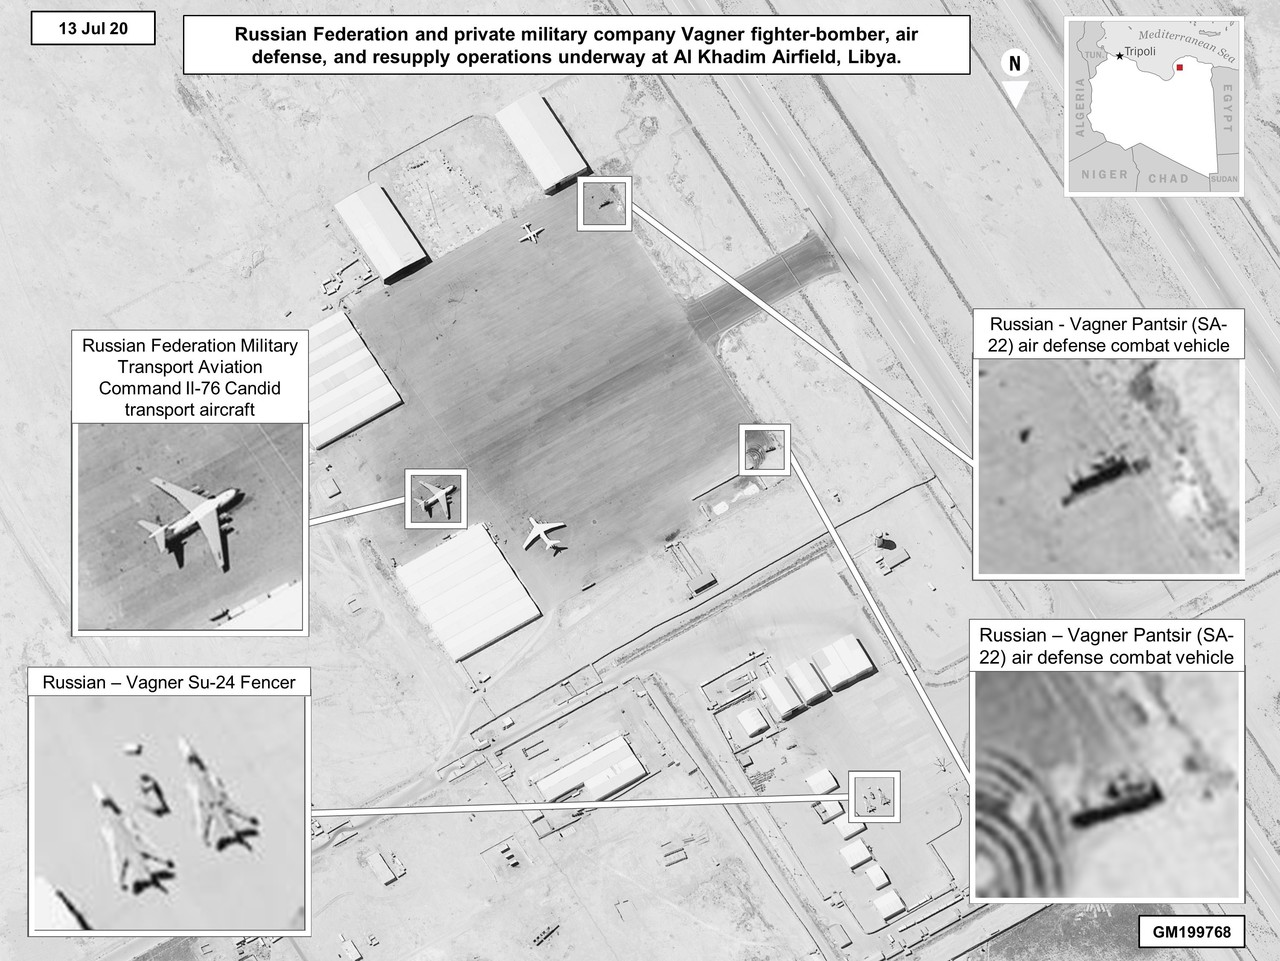 Pentagon Imagery Shows Russia, Wagner Group Continue Military in Libya